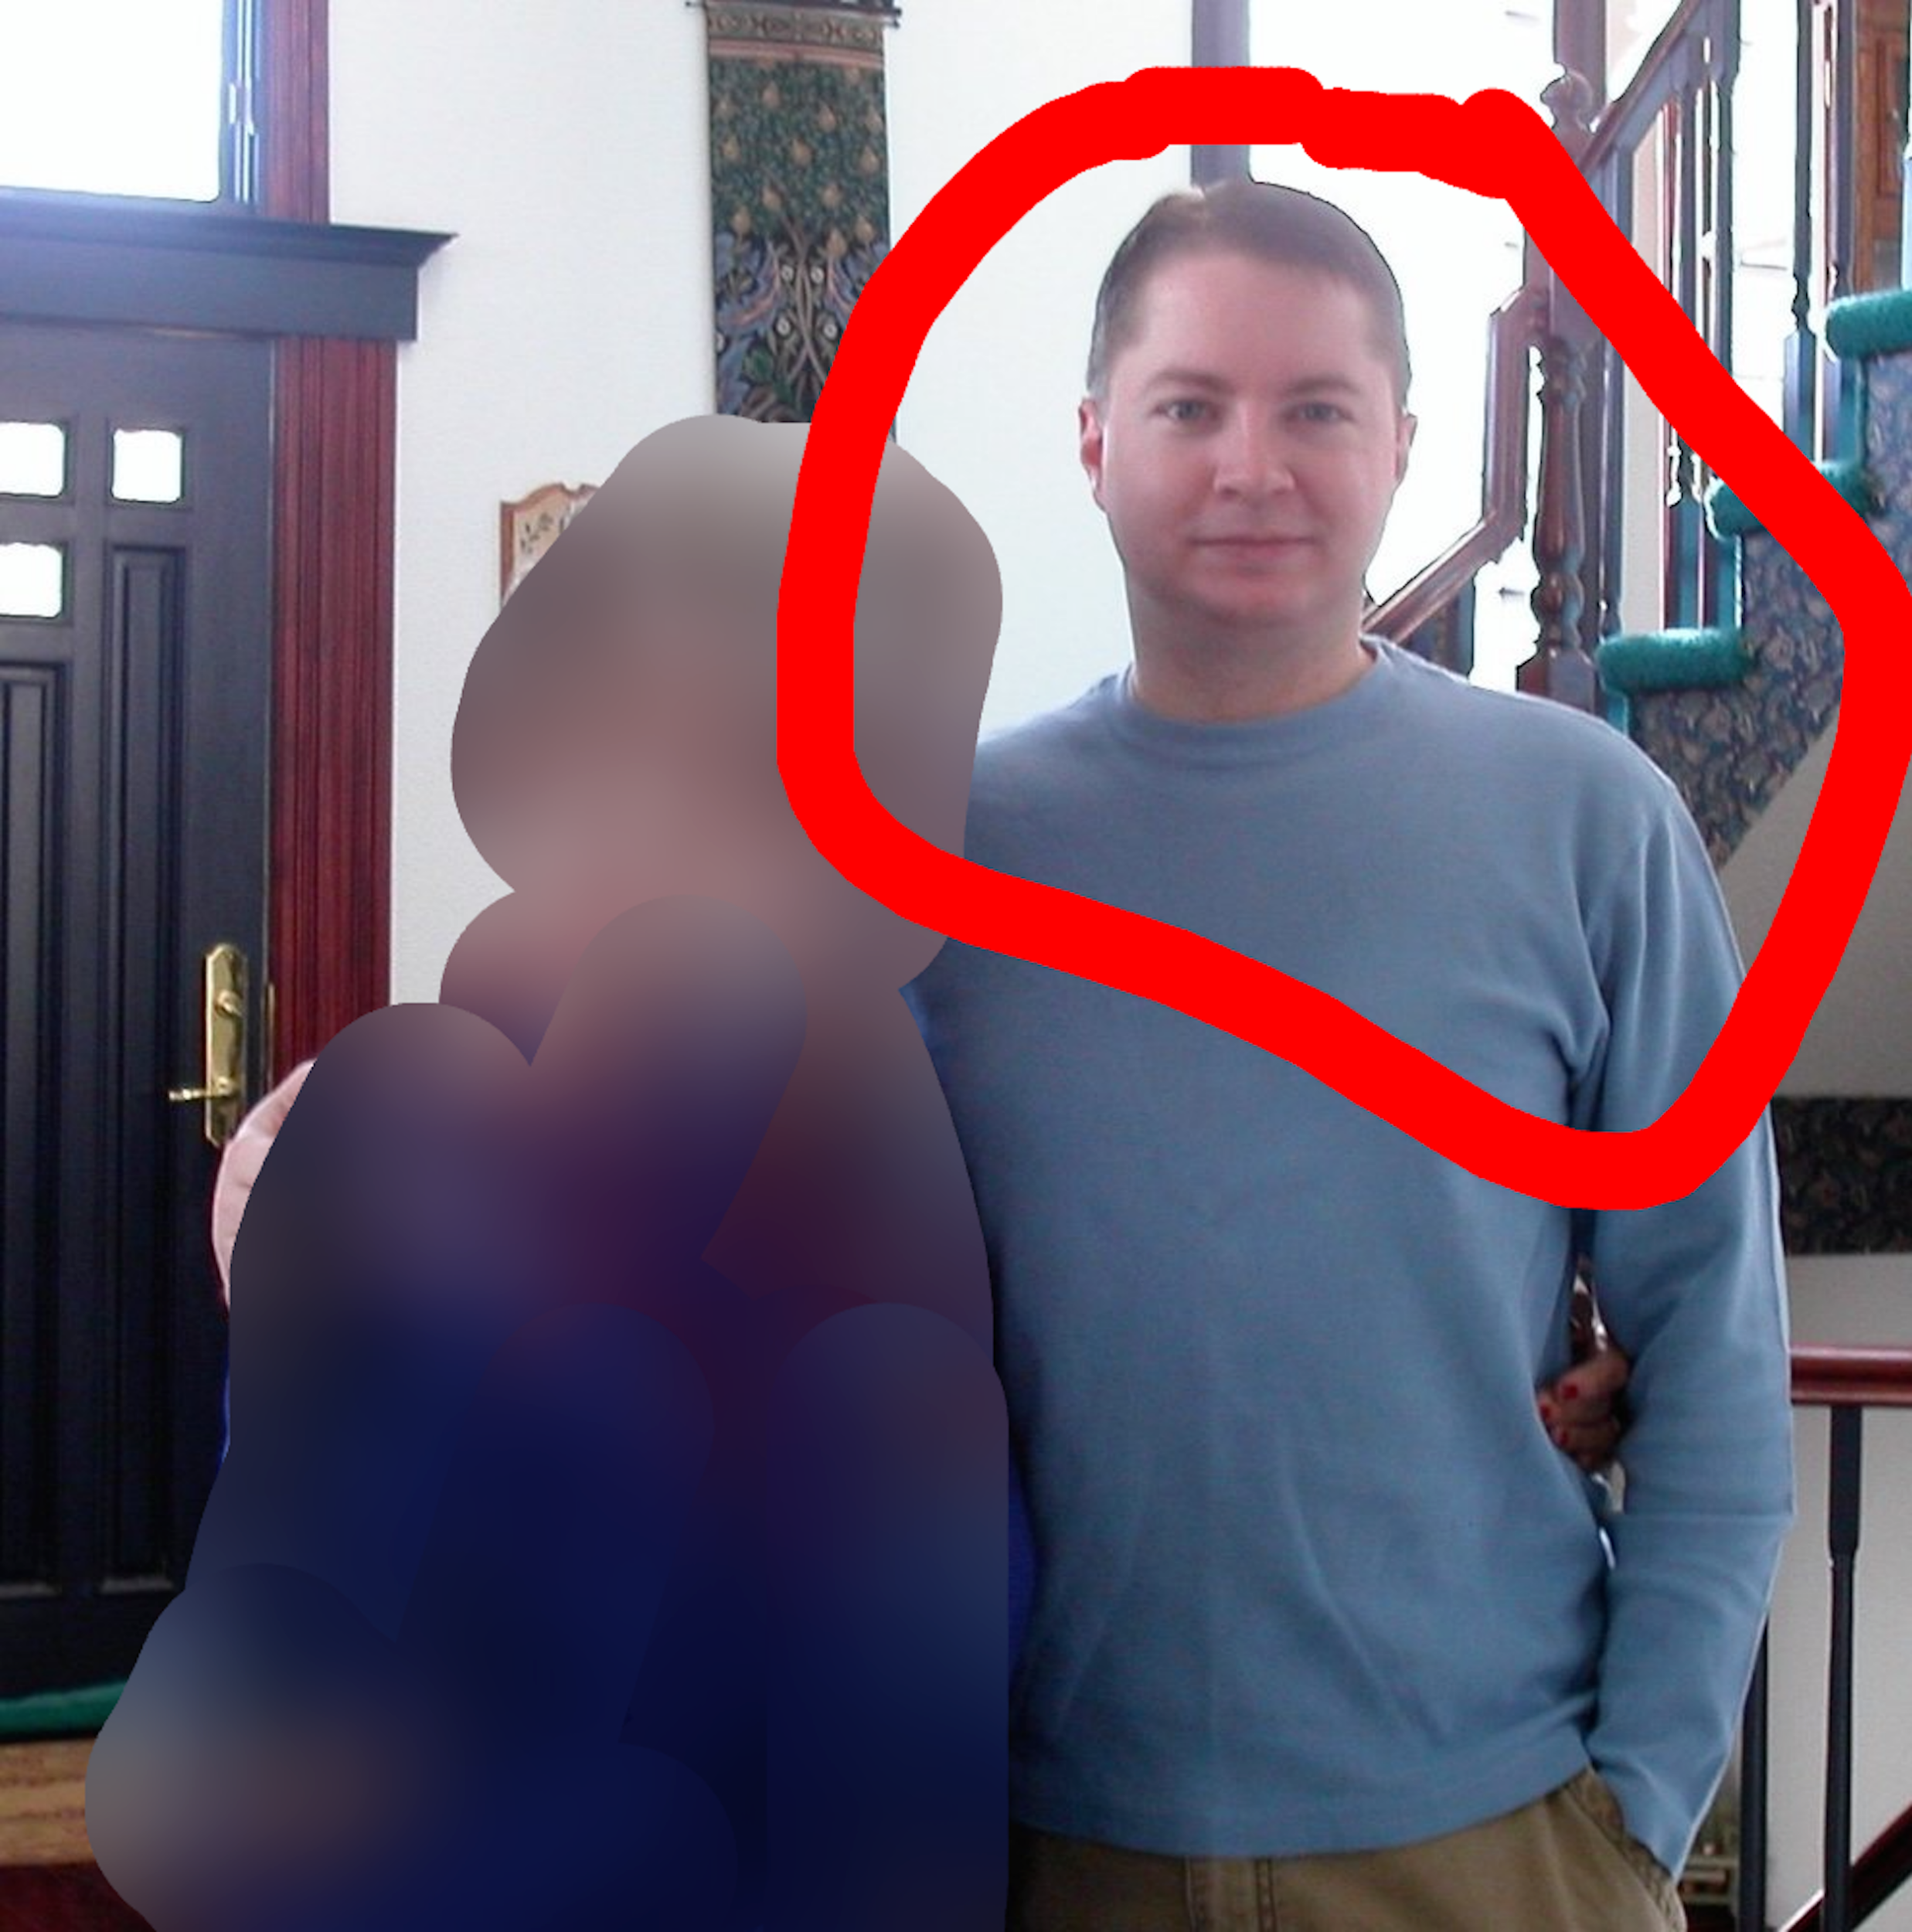 Pictures of same young man as in previous photo, next to blurred out old lady.